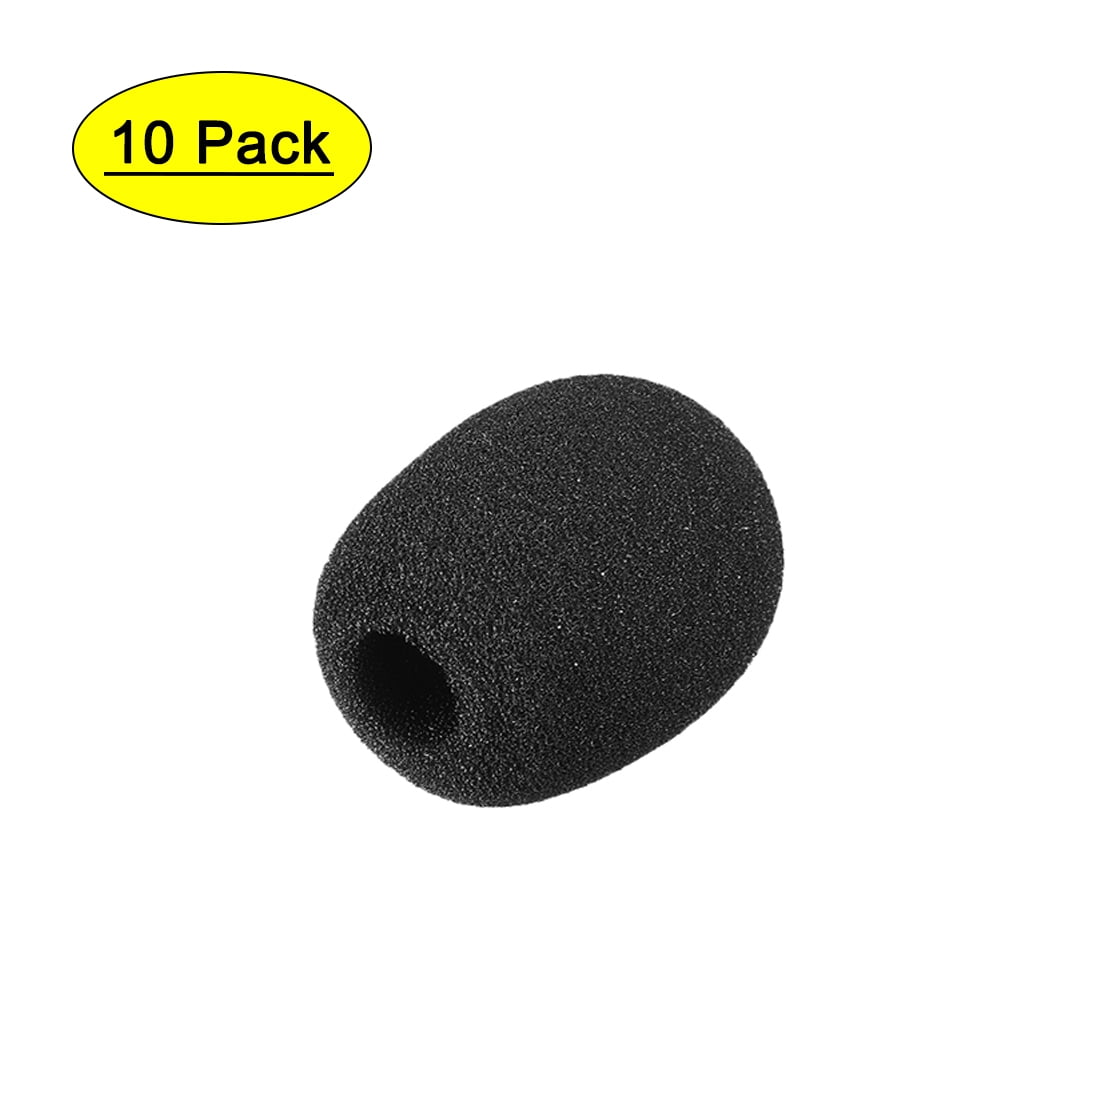 Microphone Cover 10 Pack 